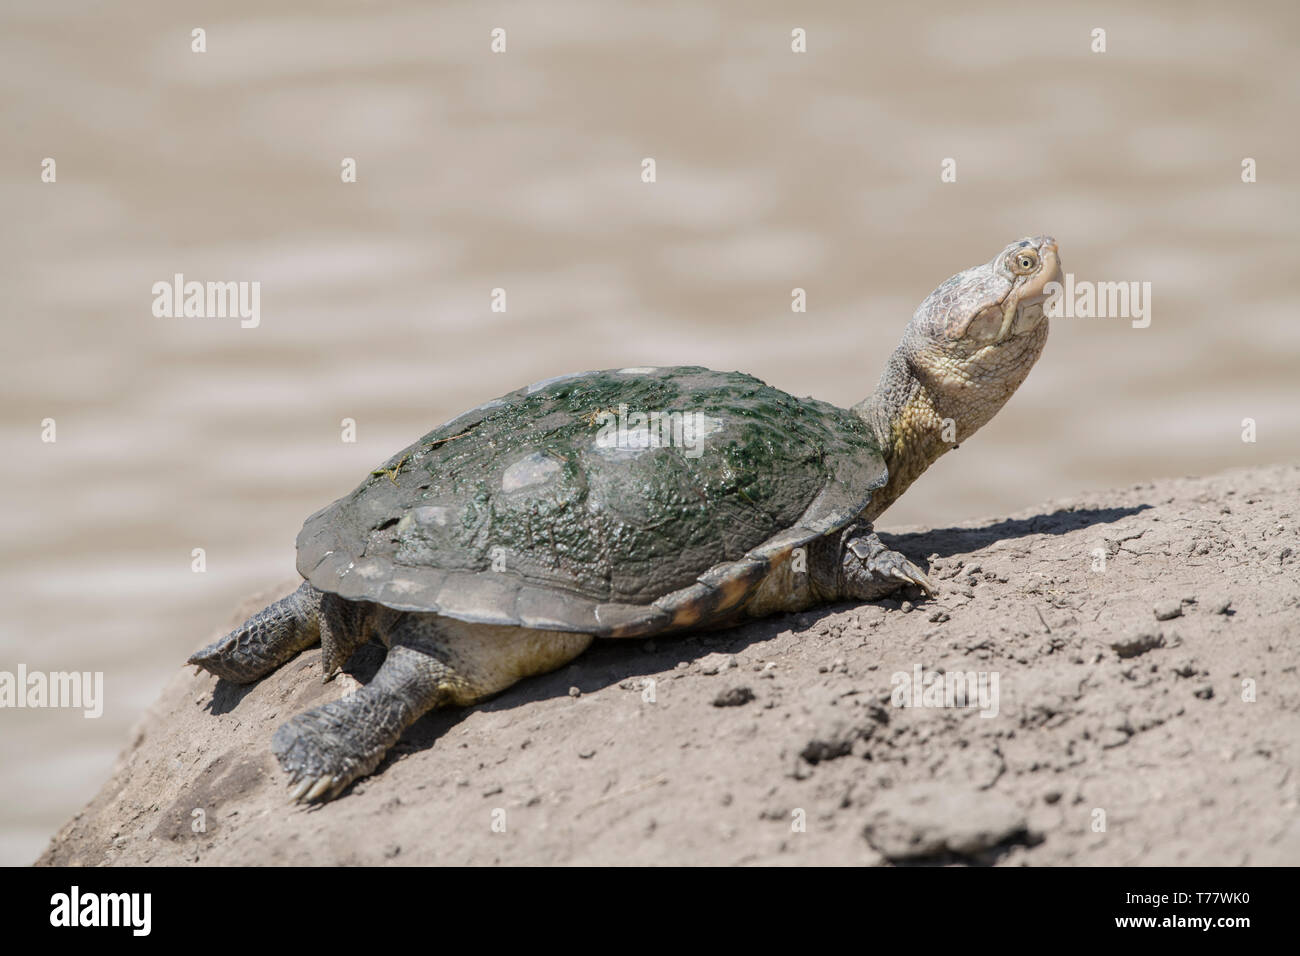 African helmeted turtle drying on land, Tanzania Stock Photo